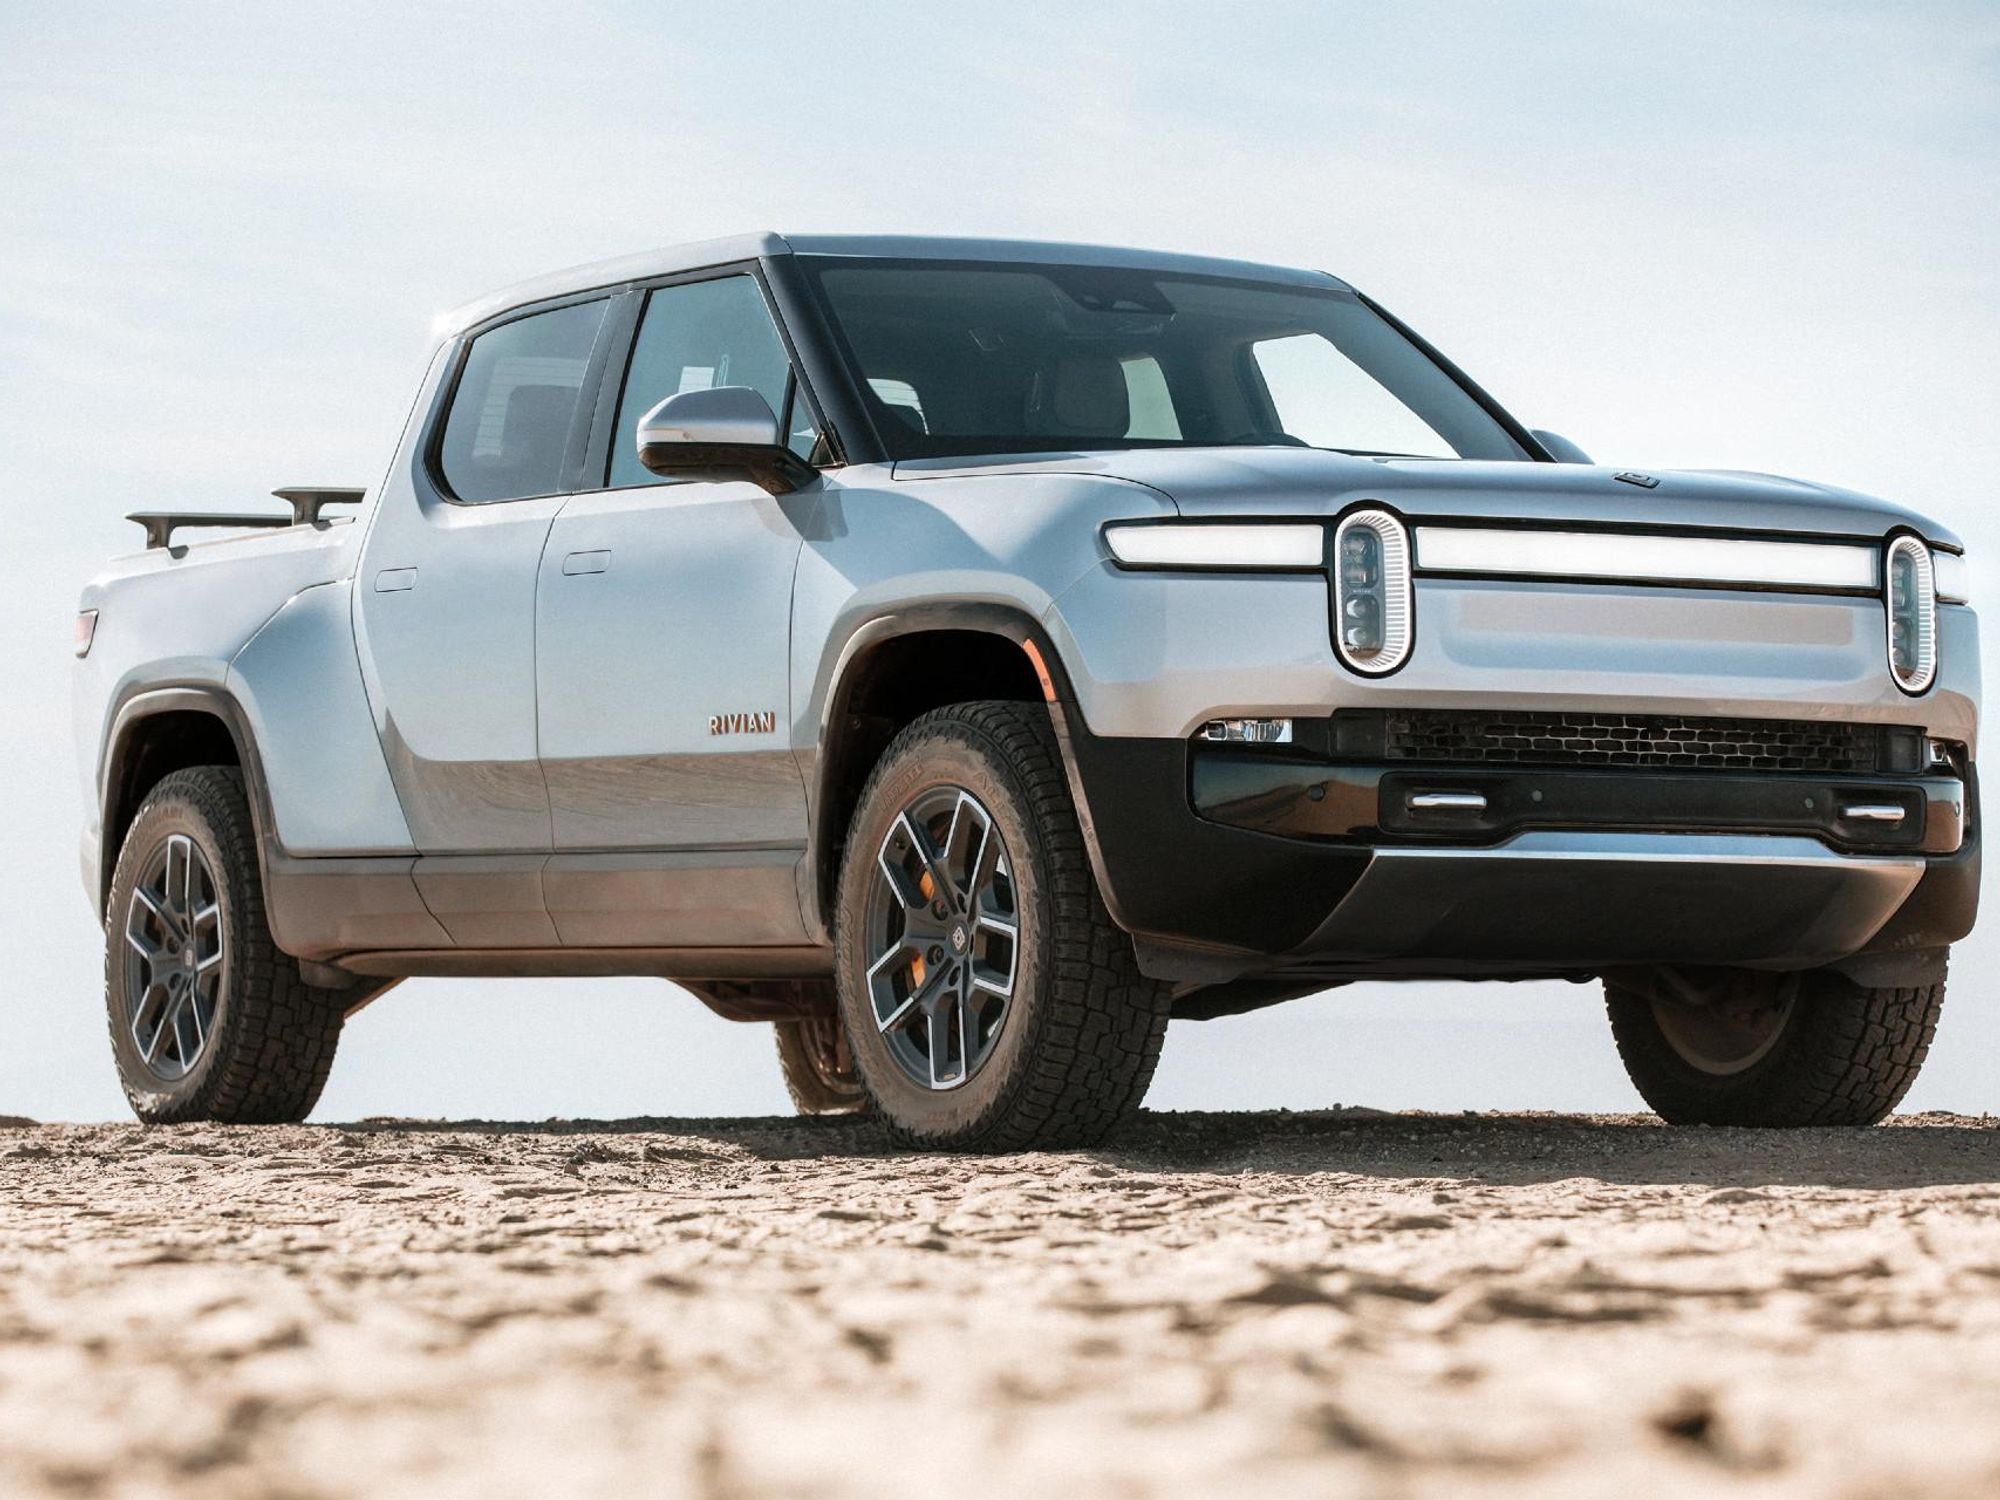 Trade-In Your Car for a Rivian Vehicle and Enjoy Tax Benefits | Rivian Offers Competitive Value Compared to other Established Companies